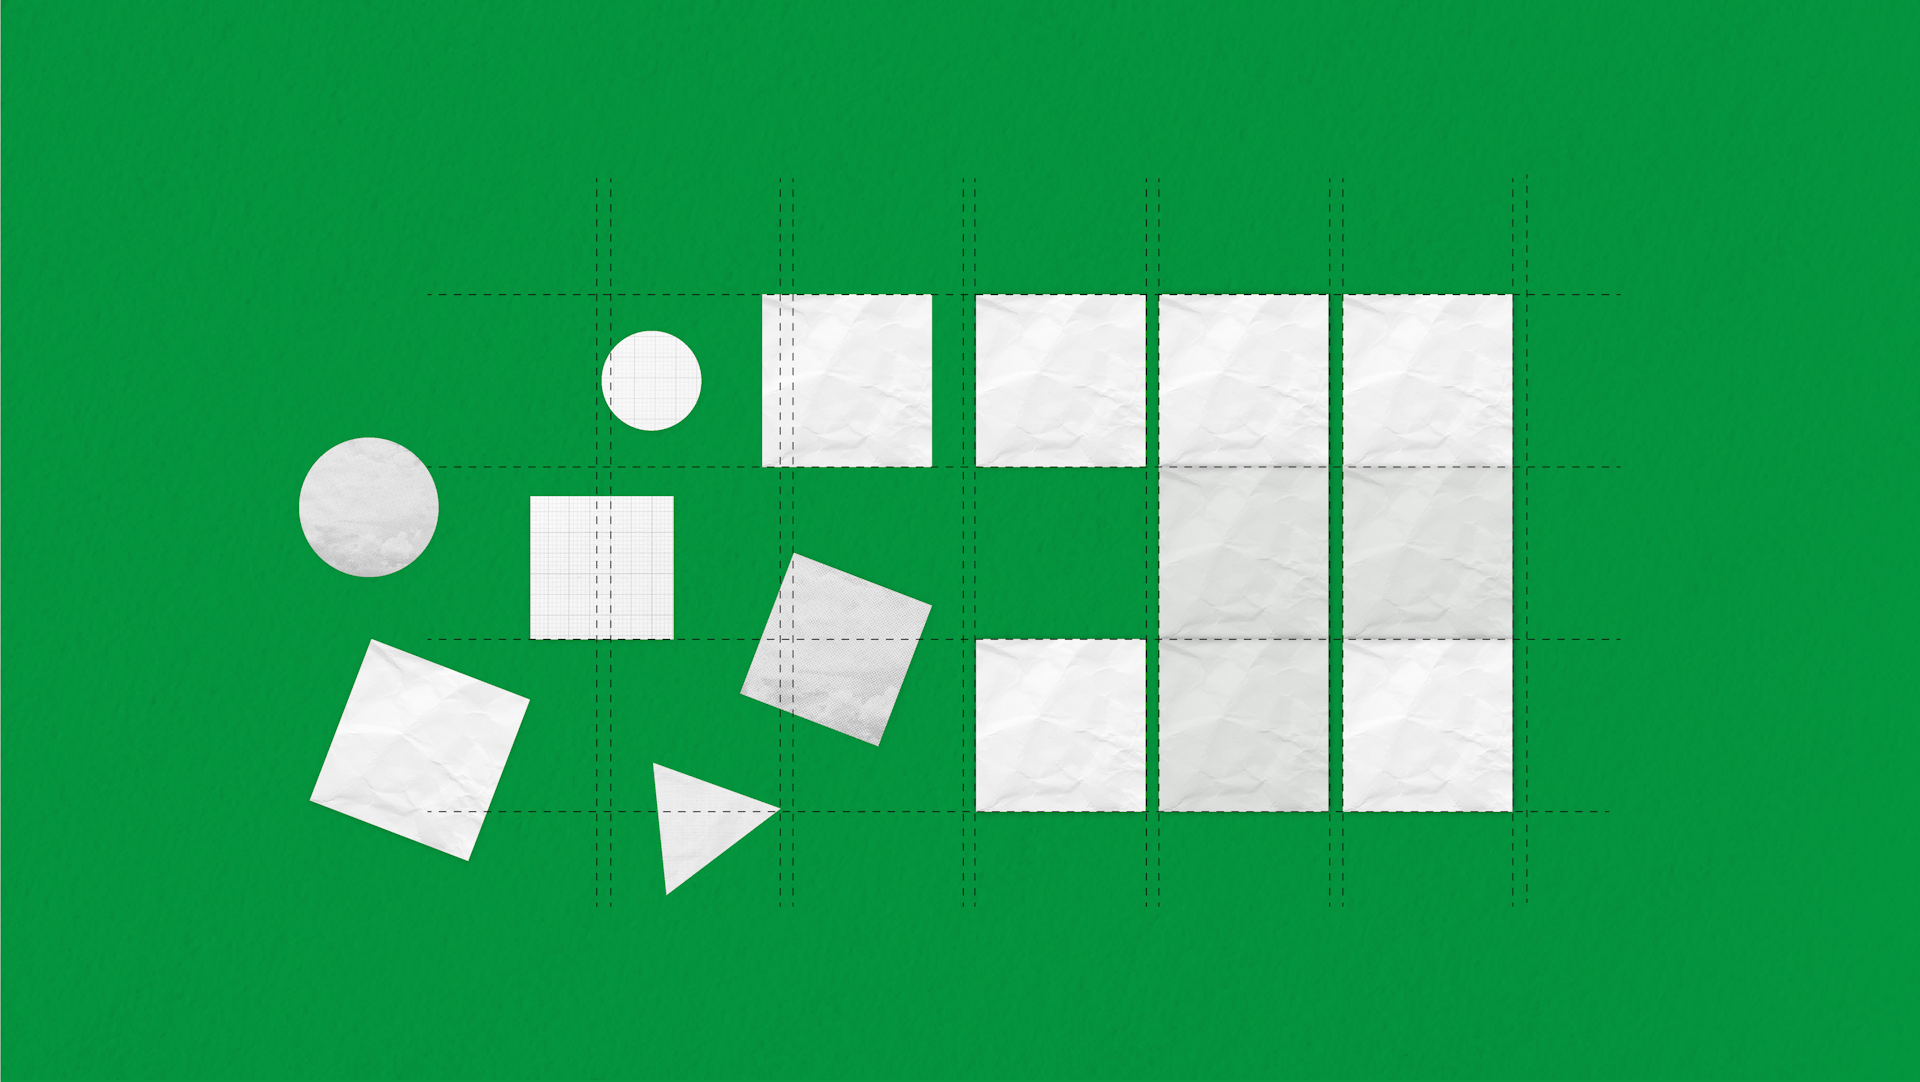 Blocks move into a more organised formation from left to right, on a green background. 